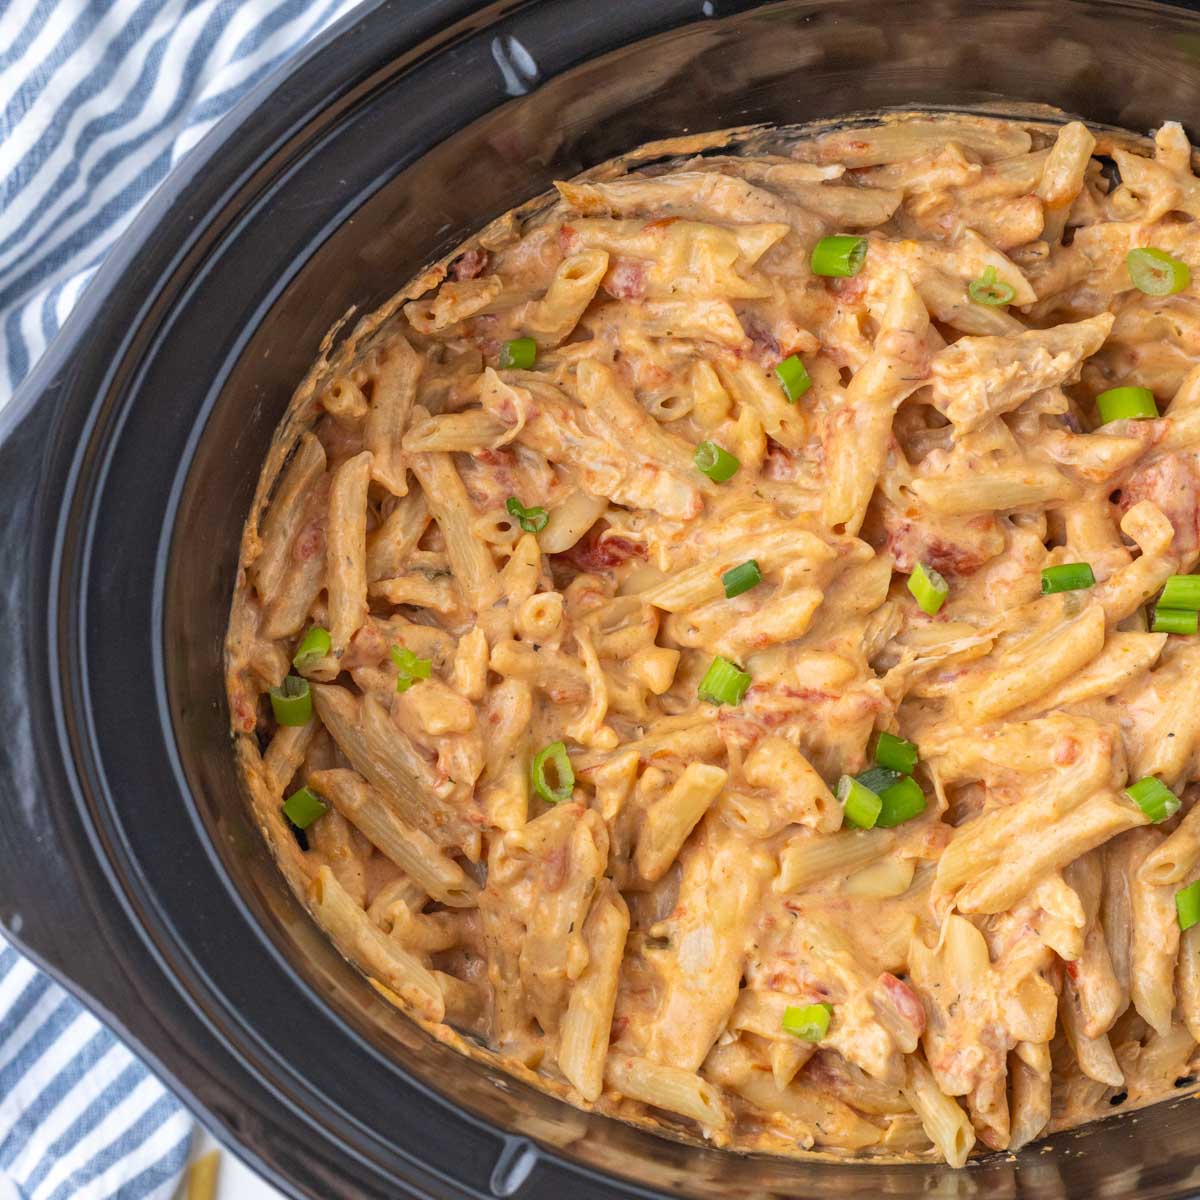 Buffalo chicken pasta in the slow cooker.